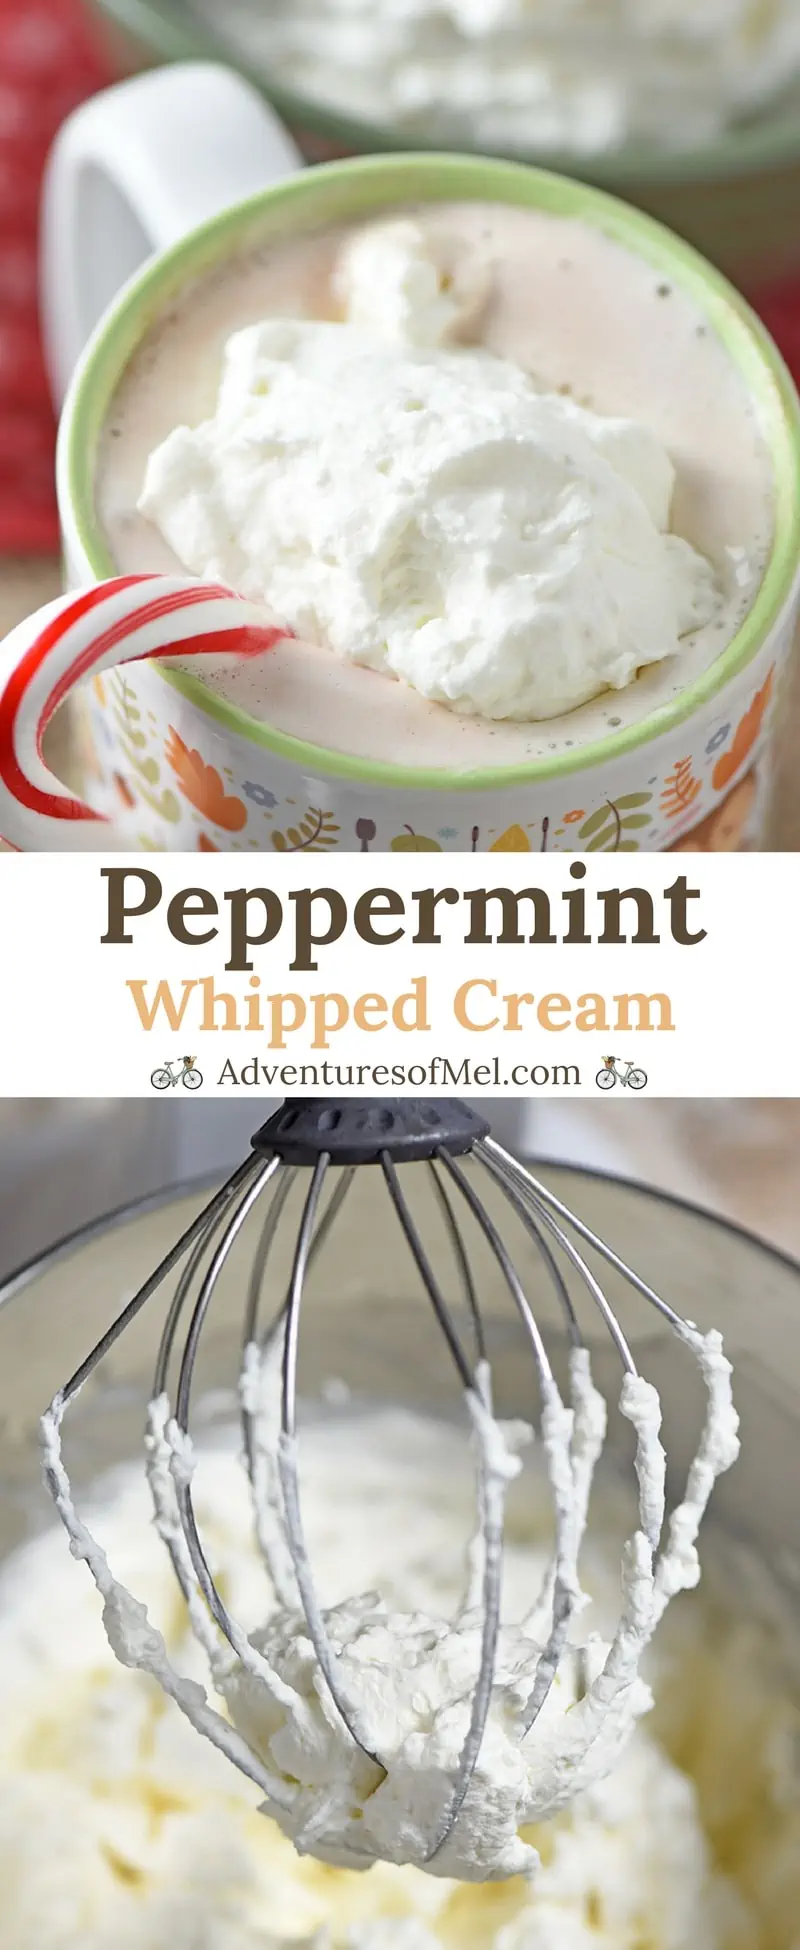 Peppermint Whipped Cream you can make in 5 minutes. Creamy delicious dessert topping or add a dollop to your hot chocolate for a minty treat!